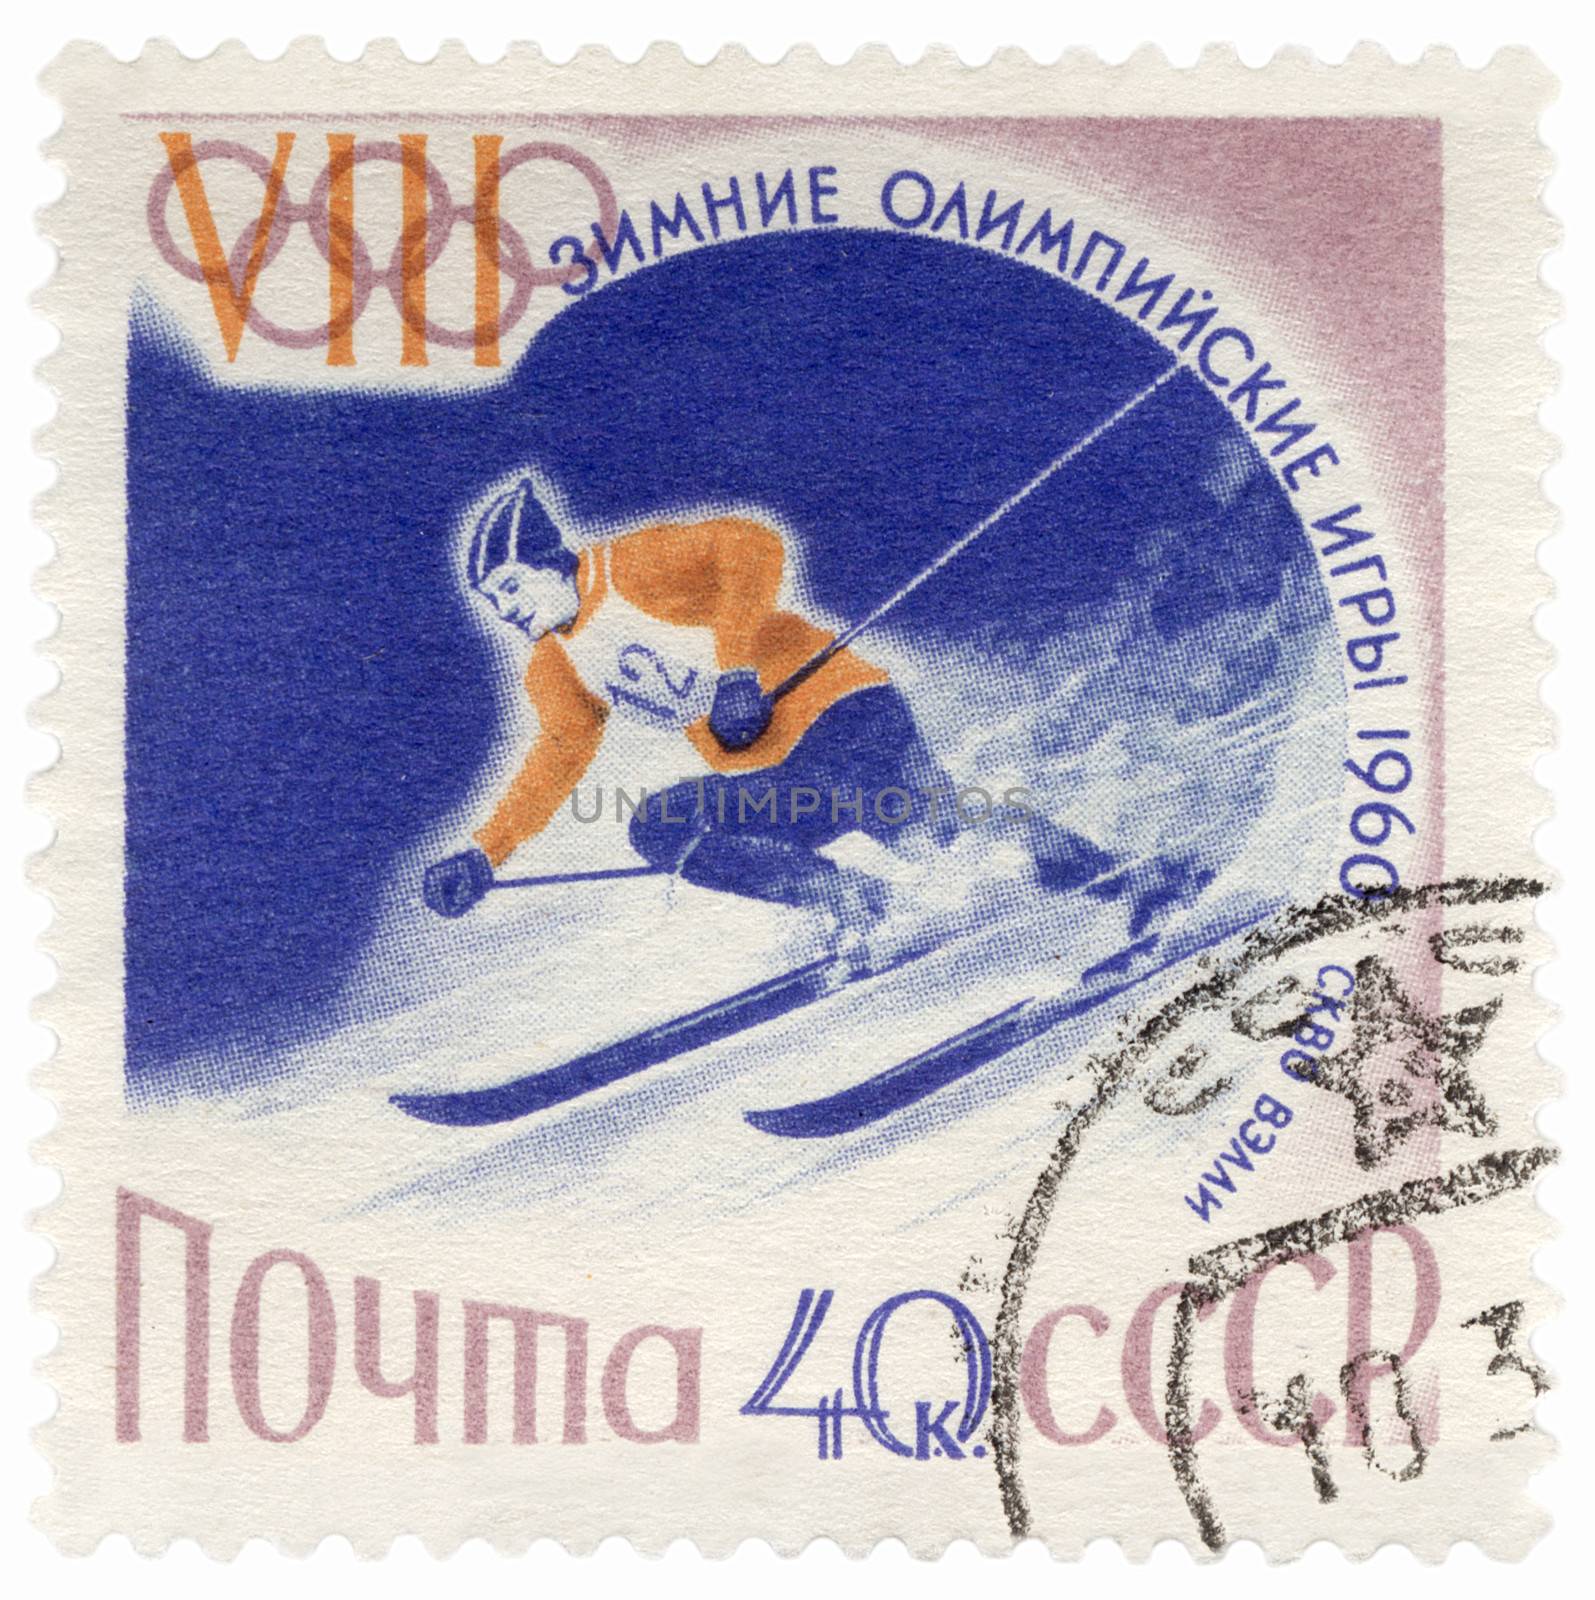 USSR - CIRCA 1960: A post stamp printed in the USSR shows skier on a steep mountain slope, dedicated to the Winter Olympic Games in Squaw Valley, series, circa 1960